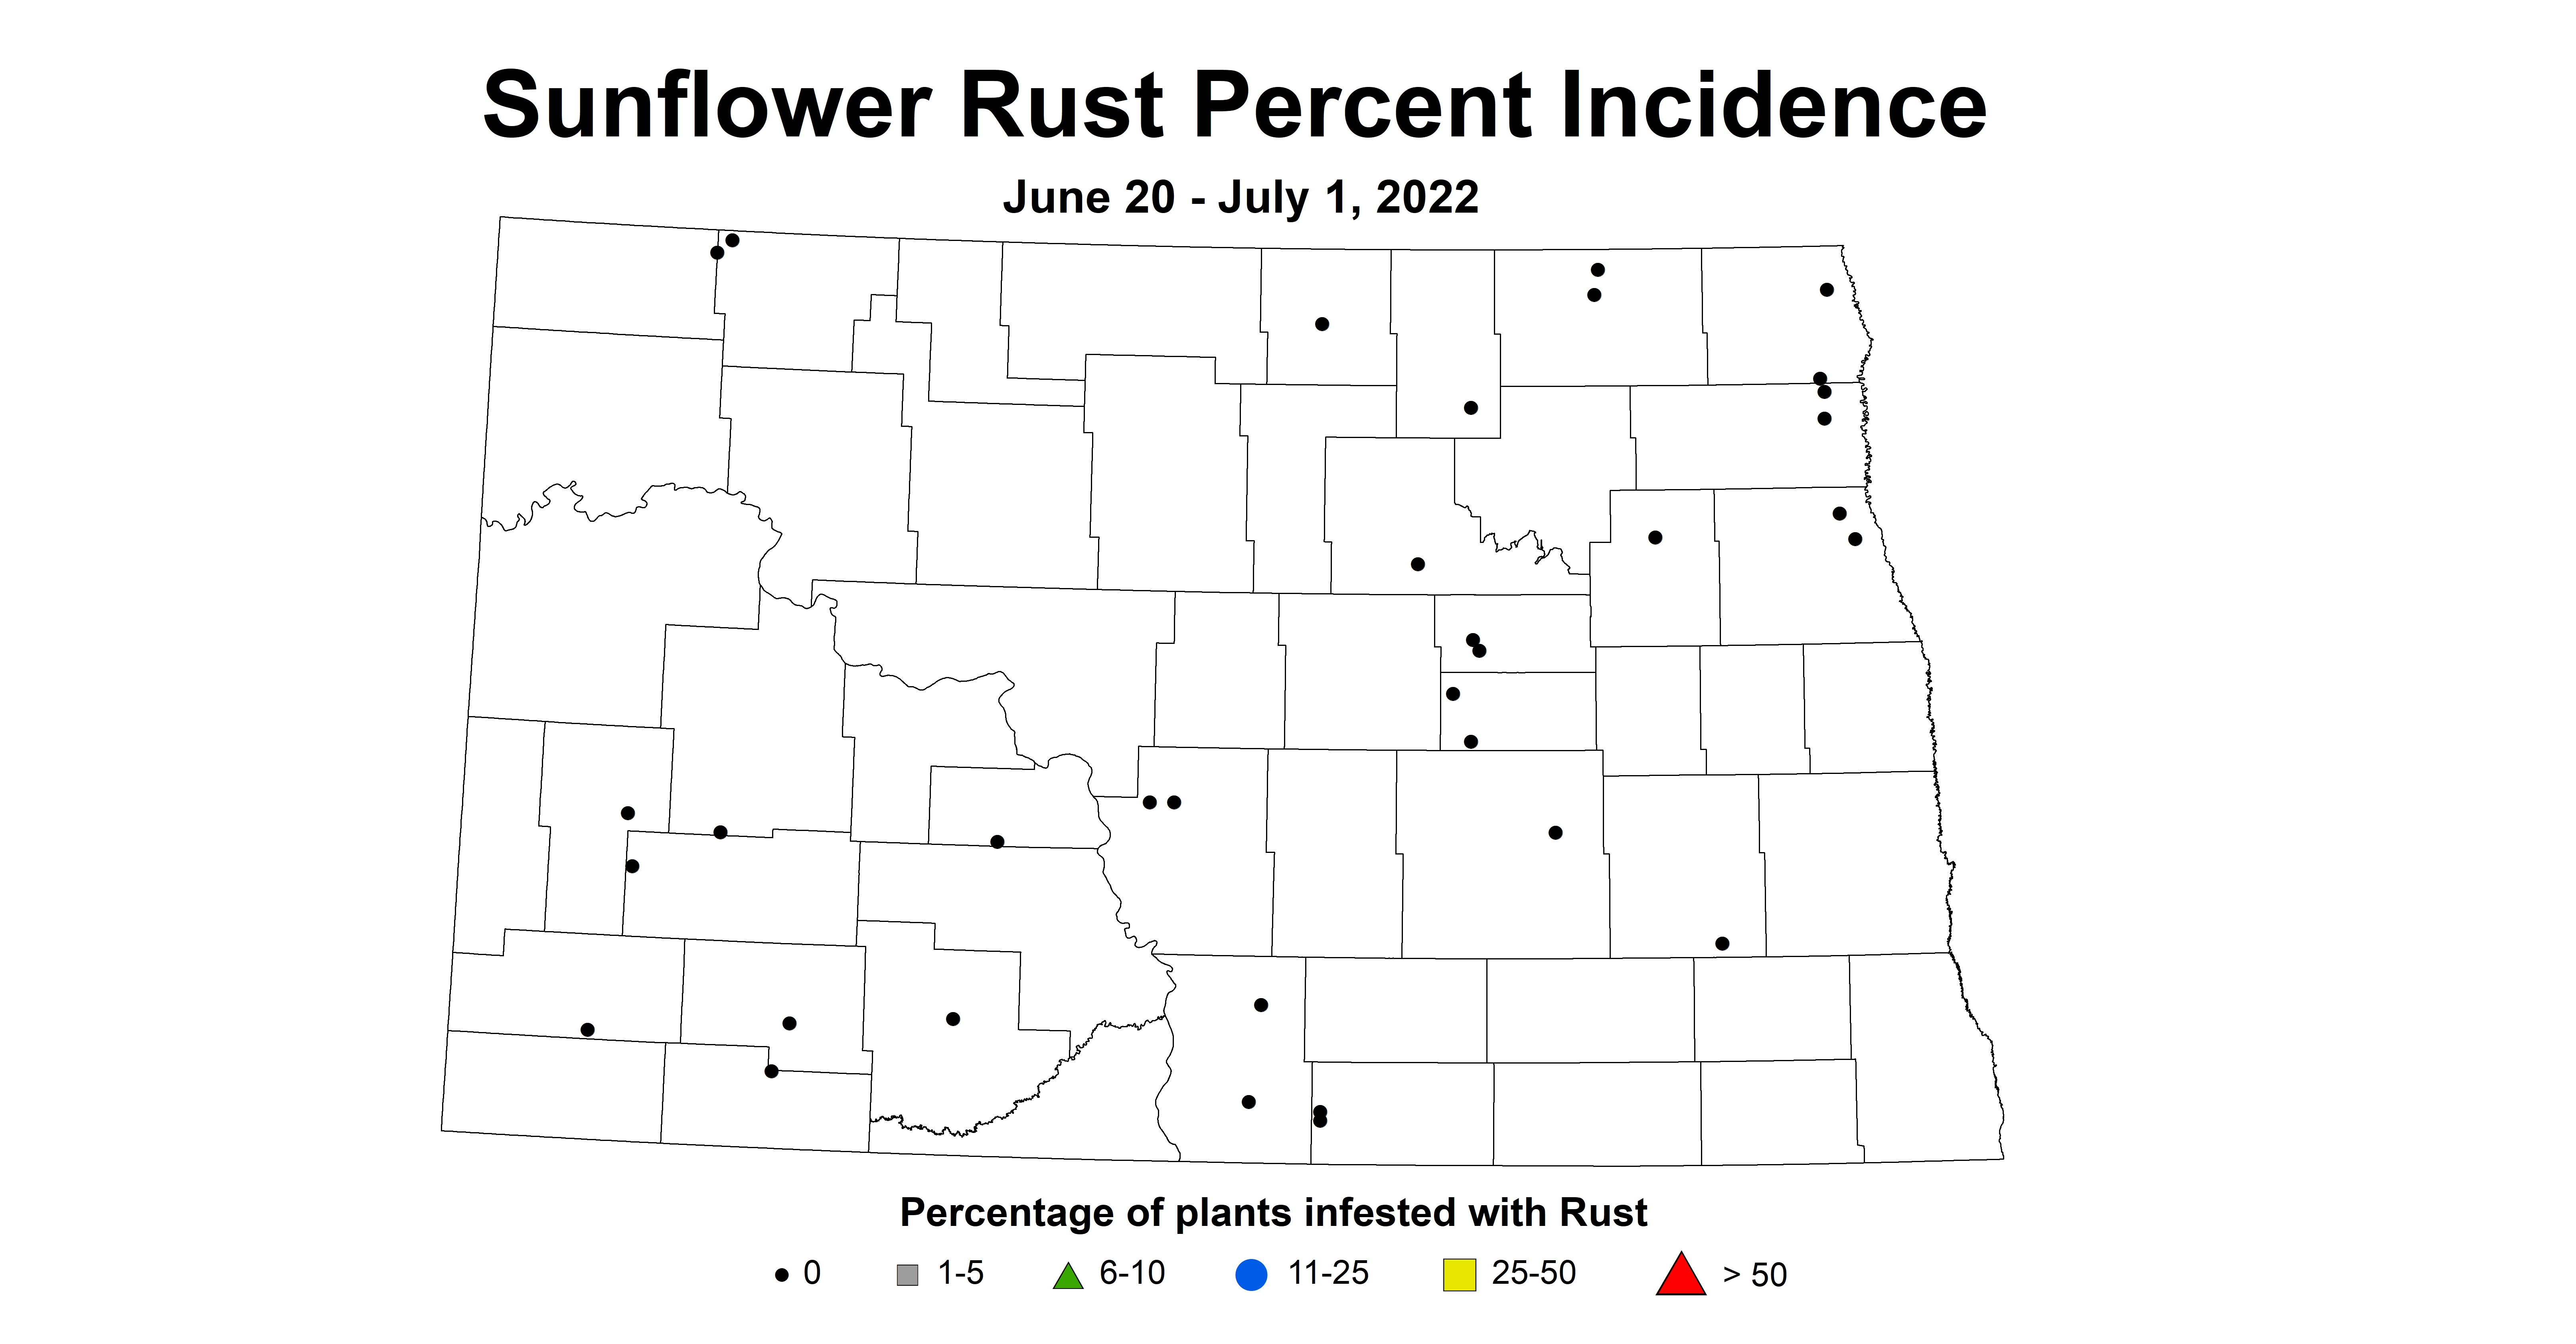 ND IPM map of sunflower rust incidence June 20 to July 1 2022